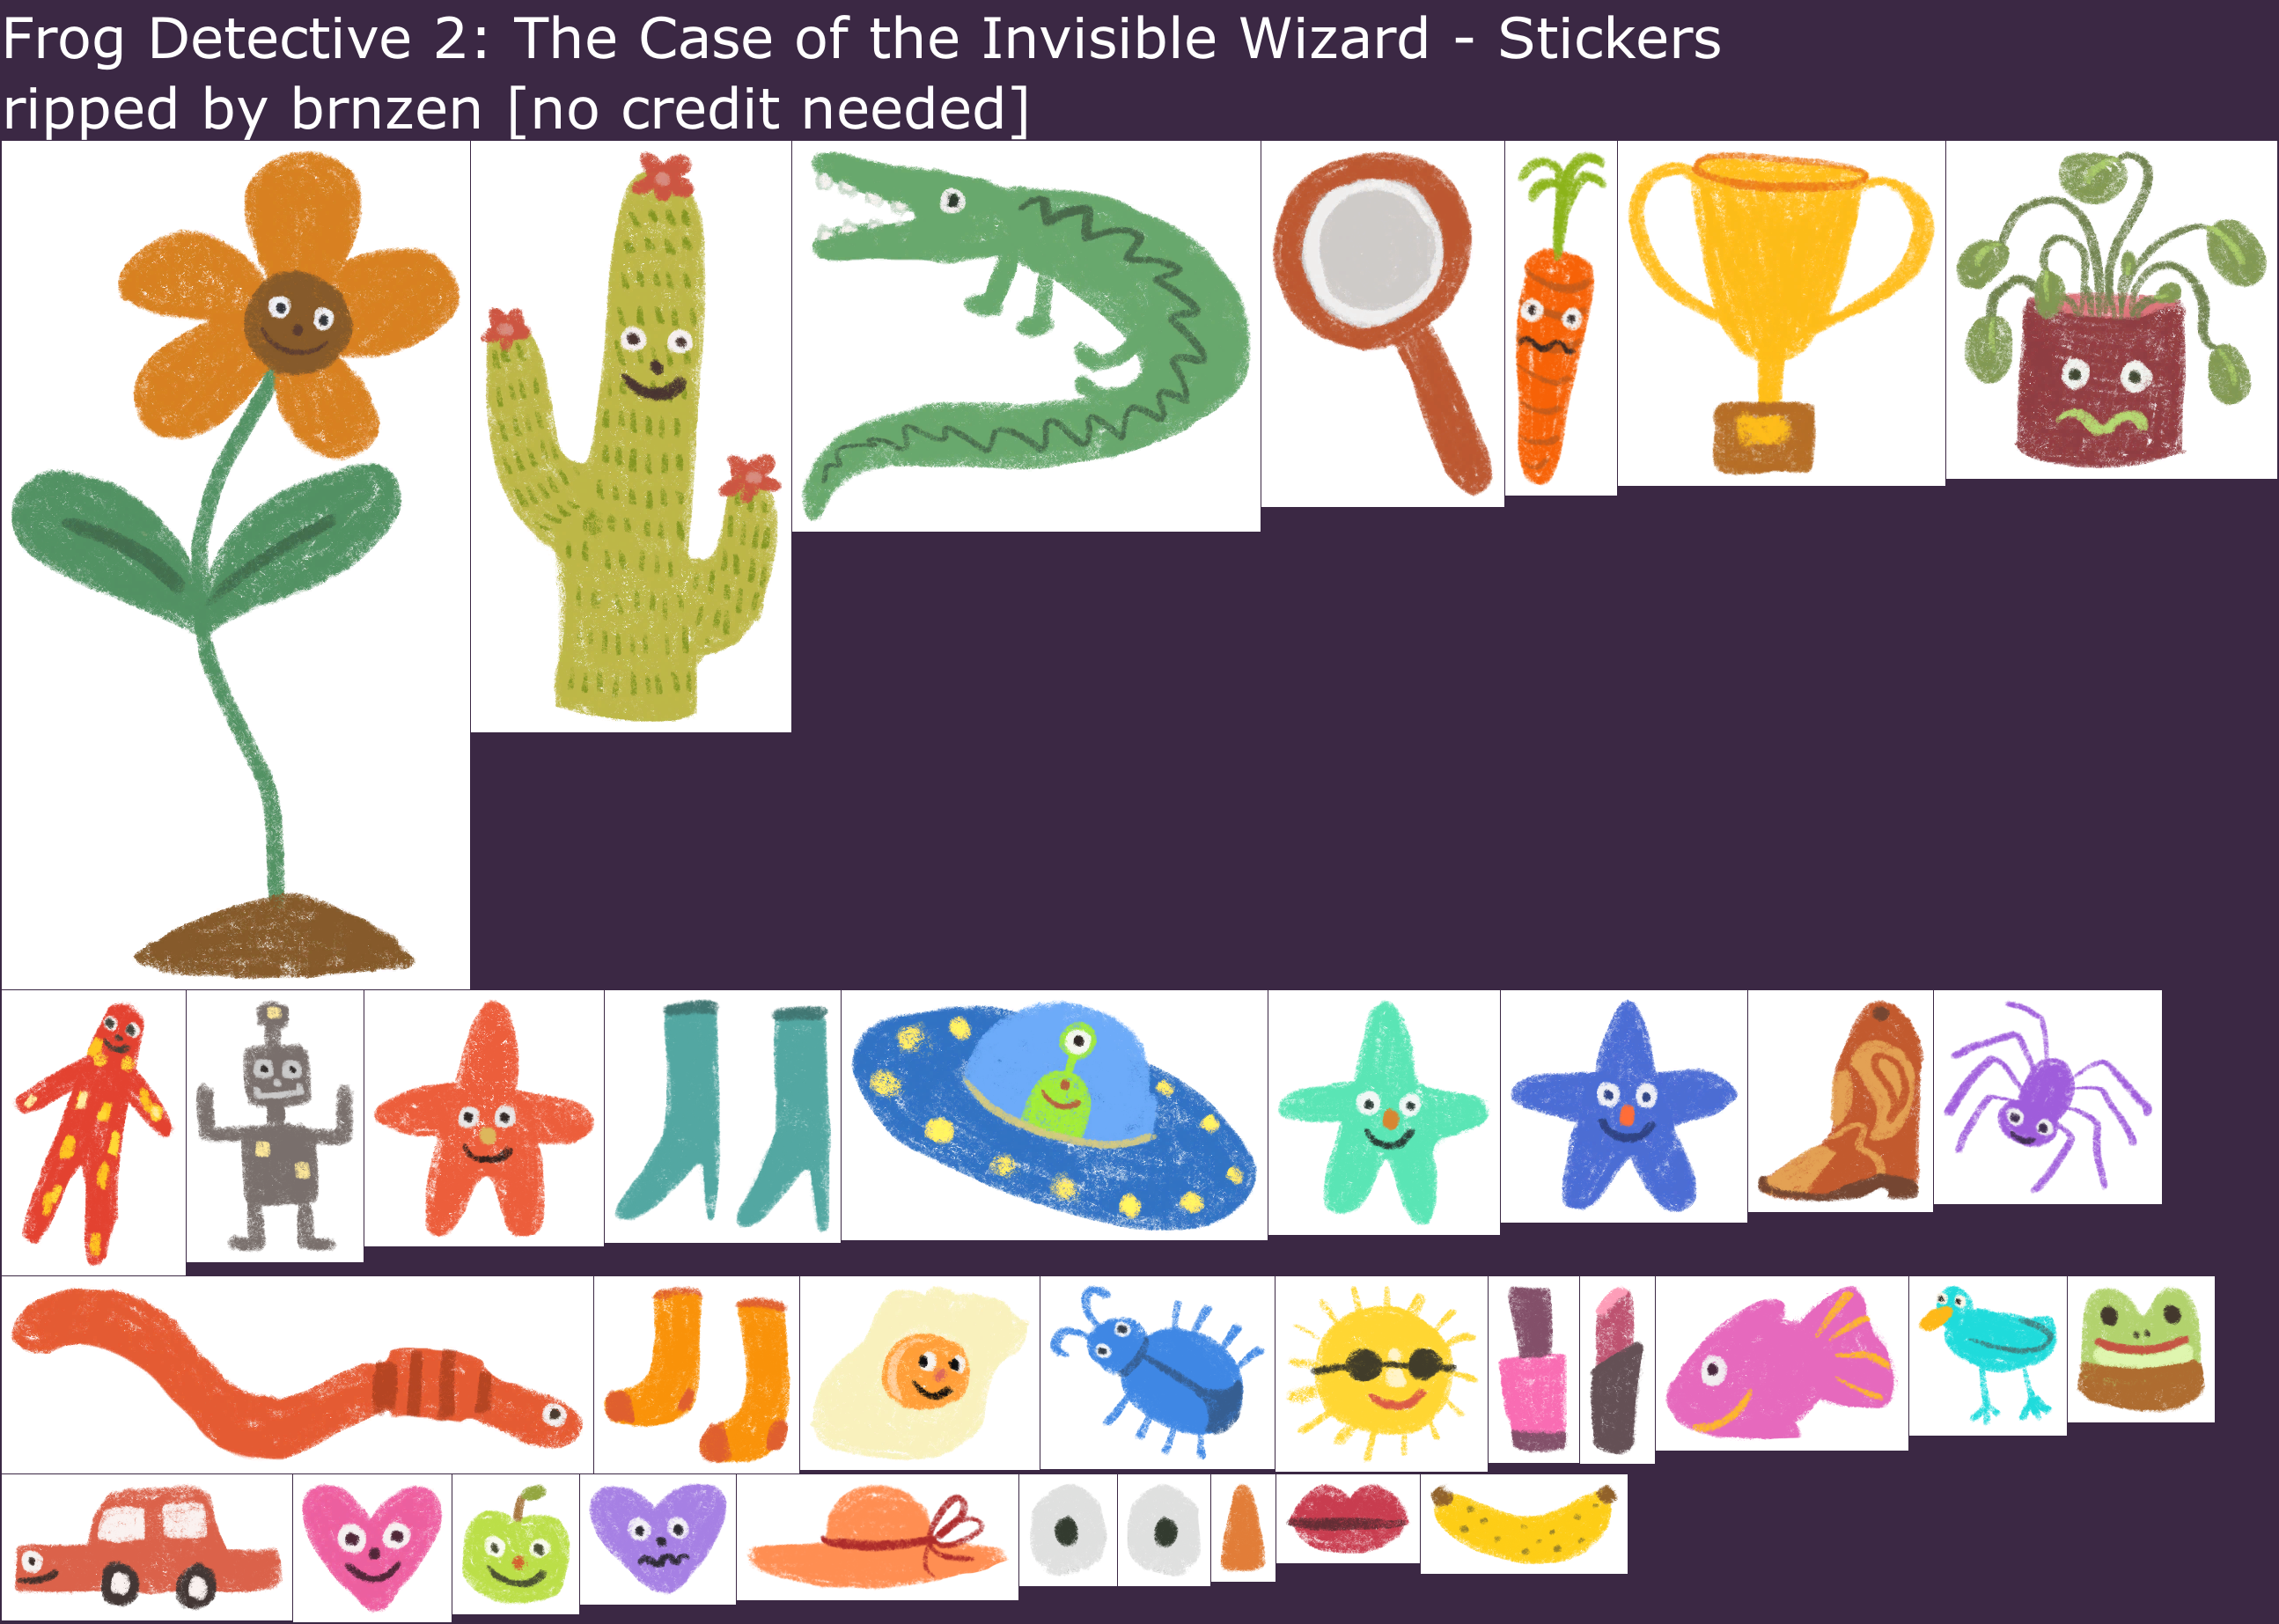 Frog Detective 2: The Case of the Invisible Wizard - Stickers